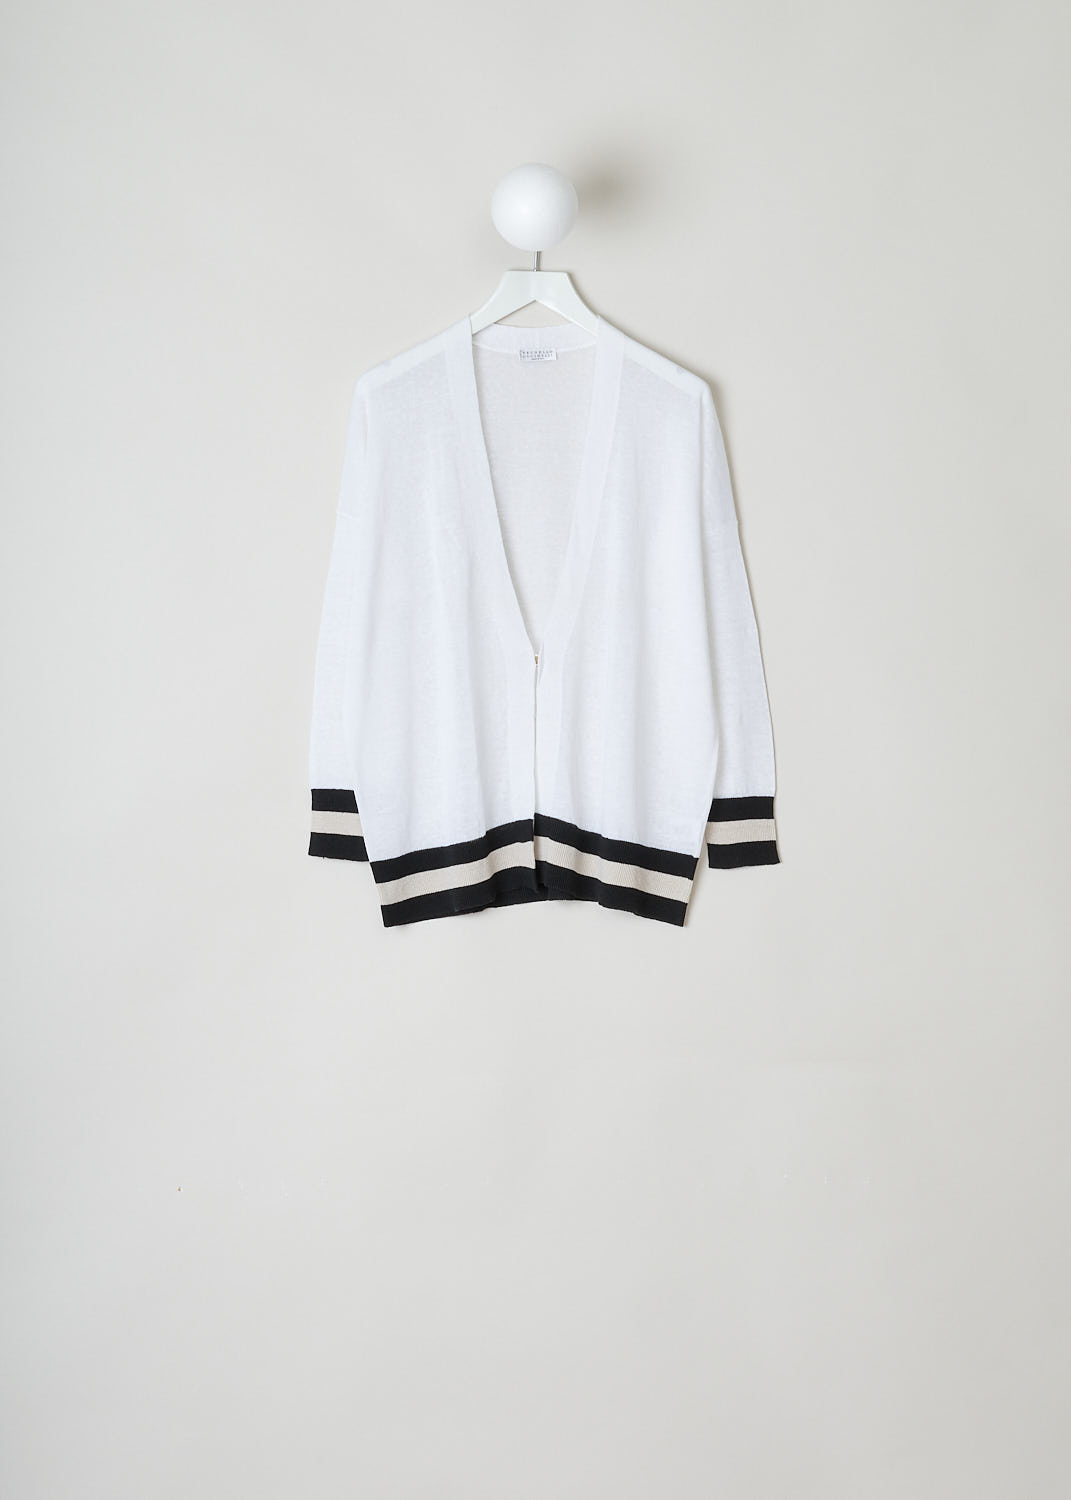 Brunello Cucinelli, Oversized white cardigan, M1T132426_C159, white, front, A white cardigan with an oversized fit, dropped shoulders and long sleeves. The cuffs and hem are striped black and beige. The fastening option here comes in the form of a single button on the front. 